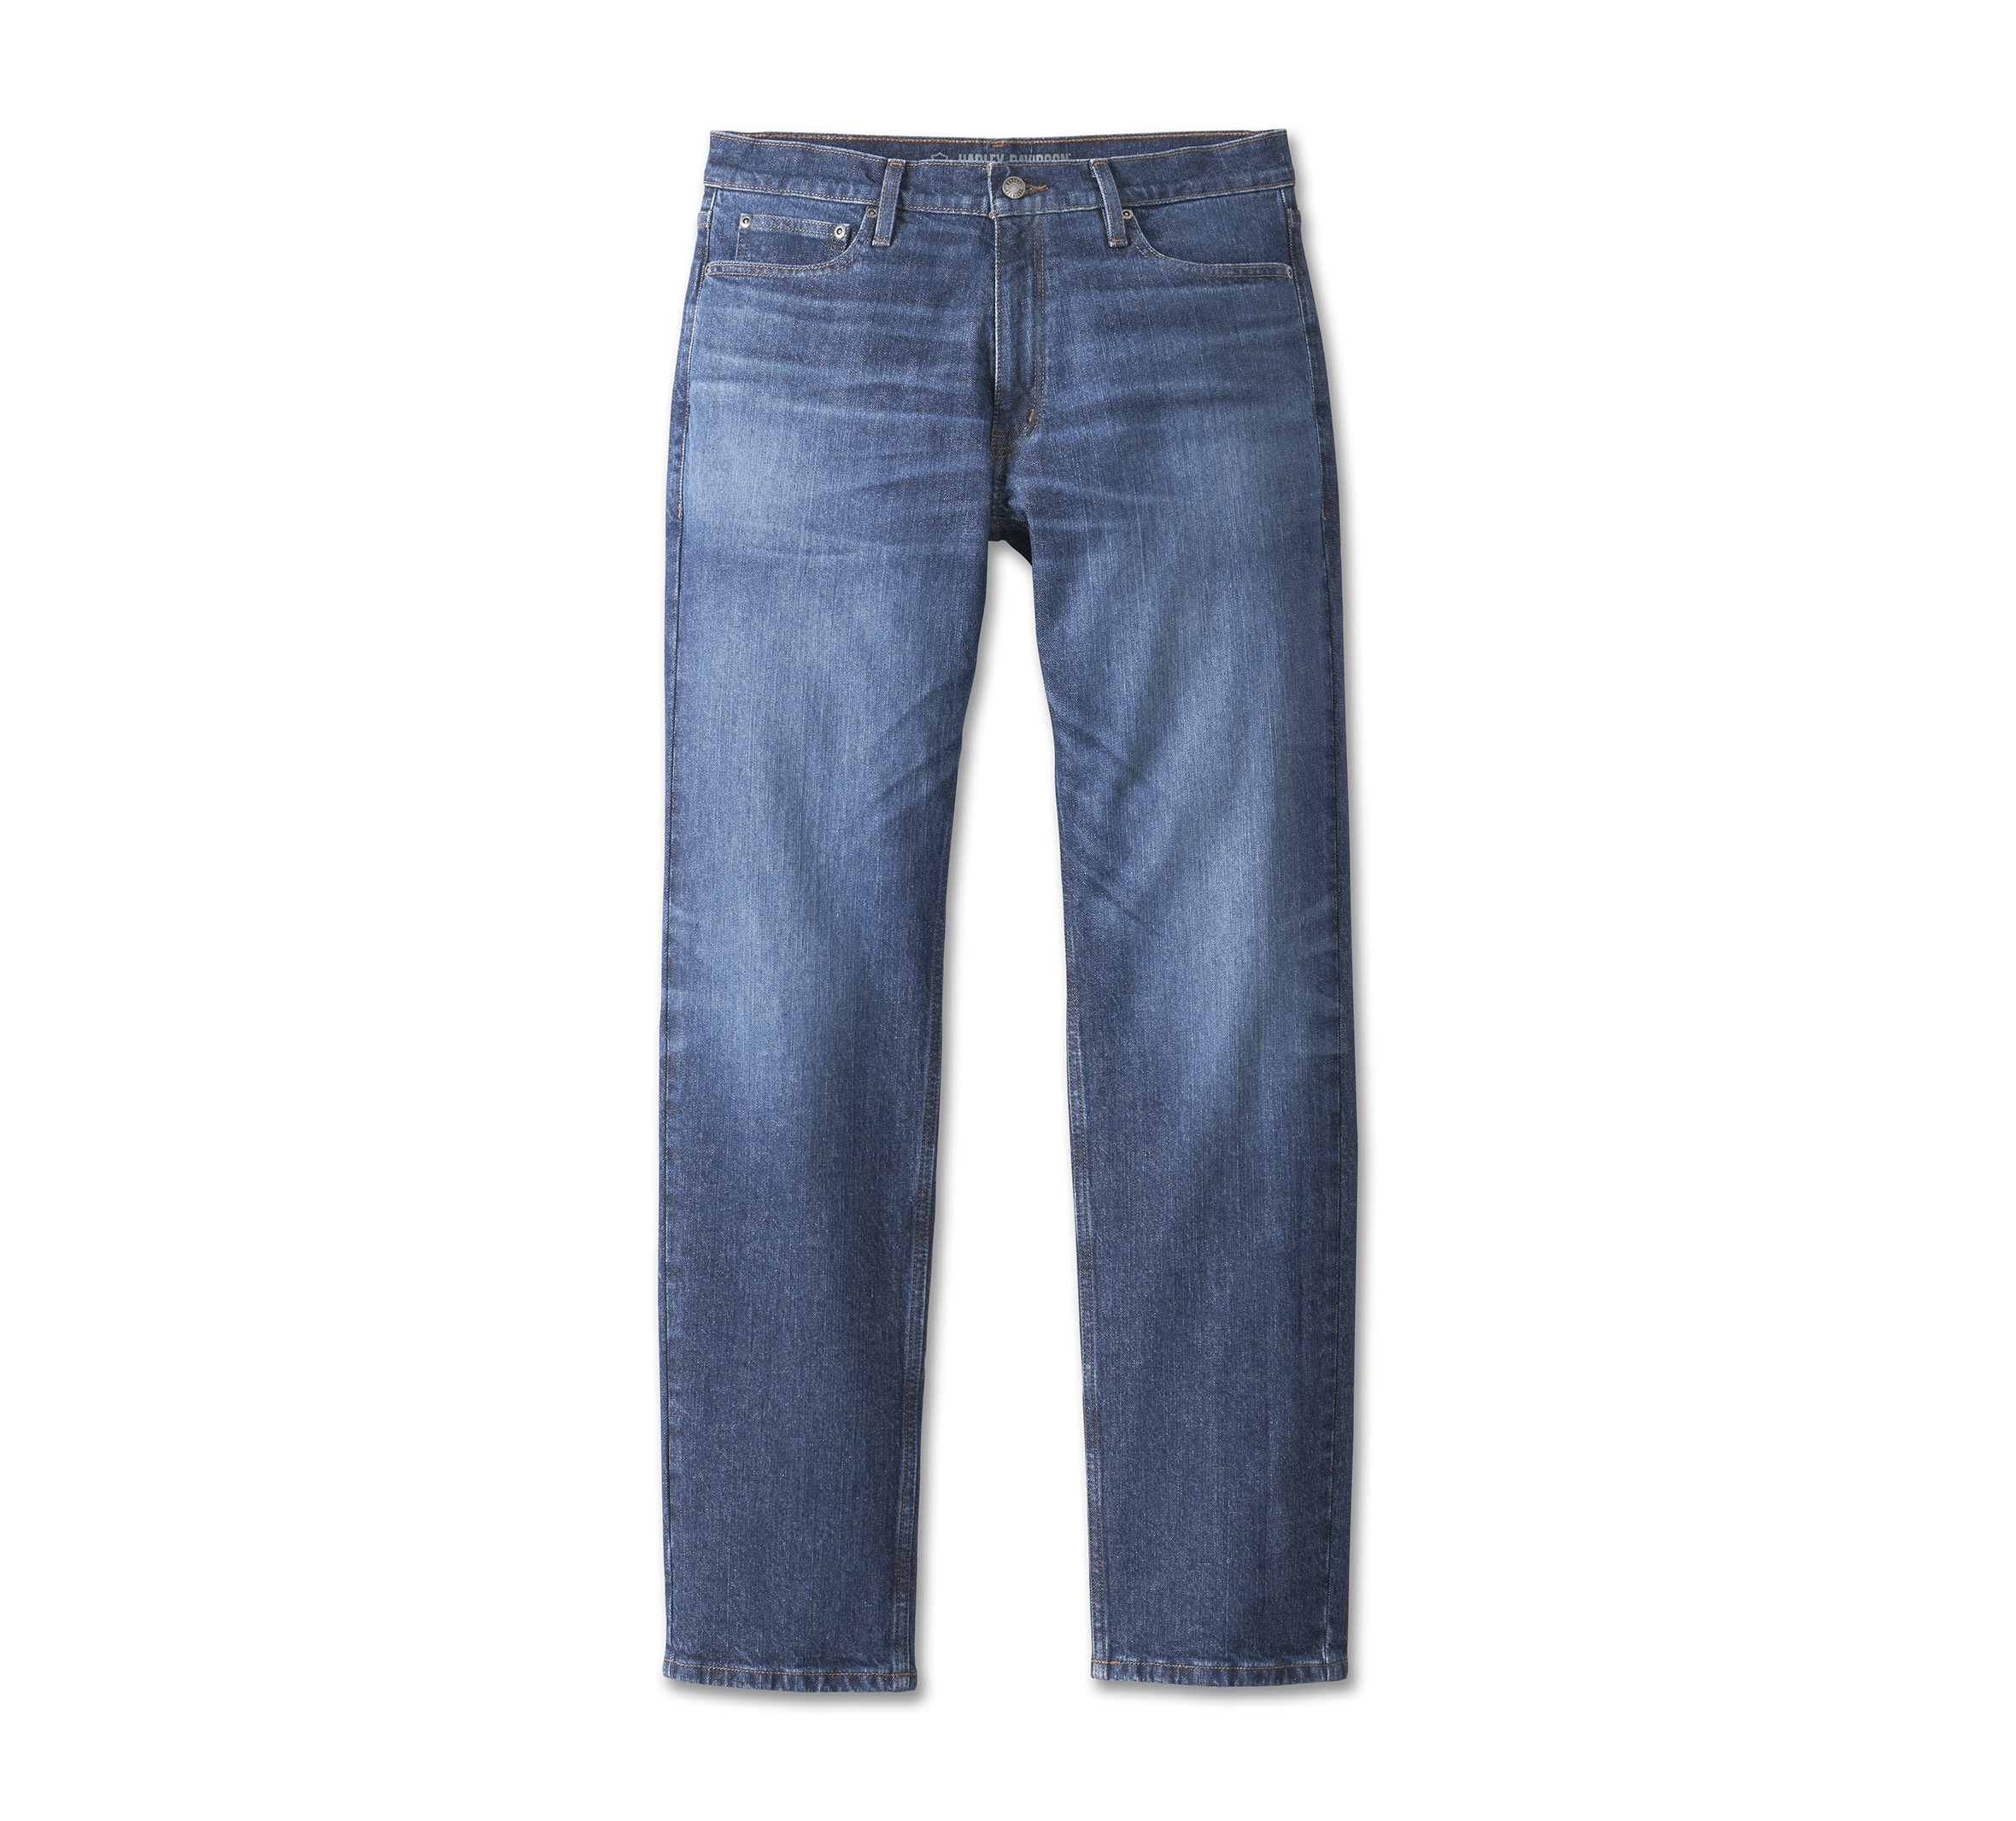 Top 4 Asian Online Shops for Korean Jeans – Lychee the Label